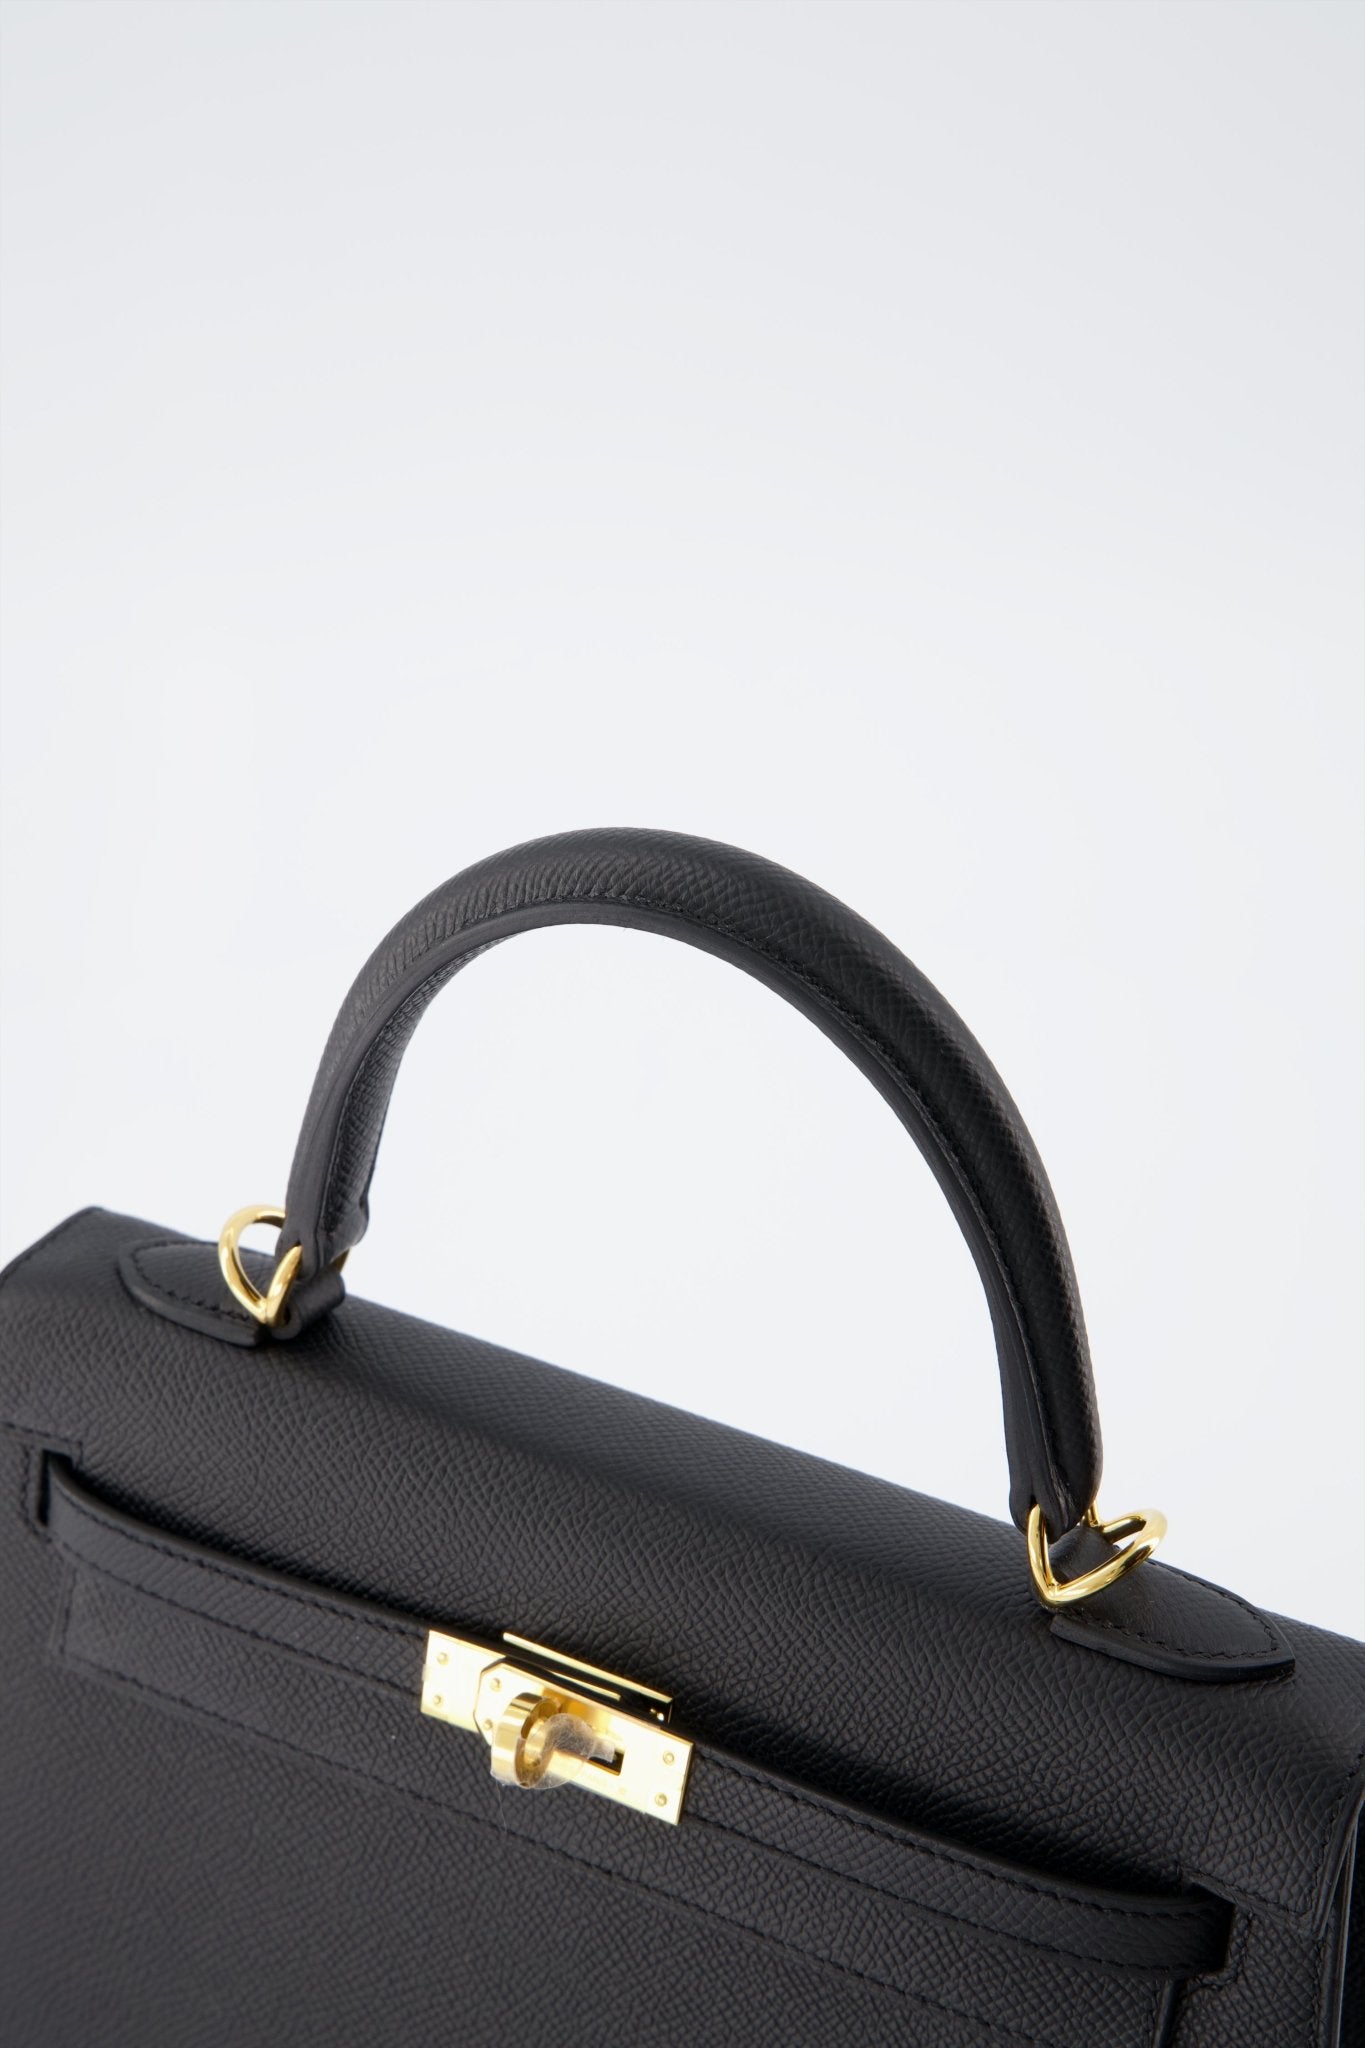 Hermes Mini Kelly 20 Sellier Bag in Black Epsom Leather with Gold